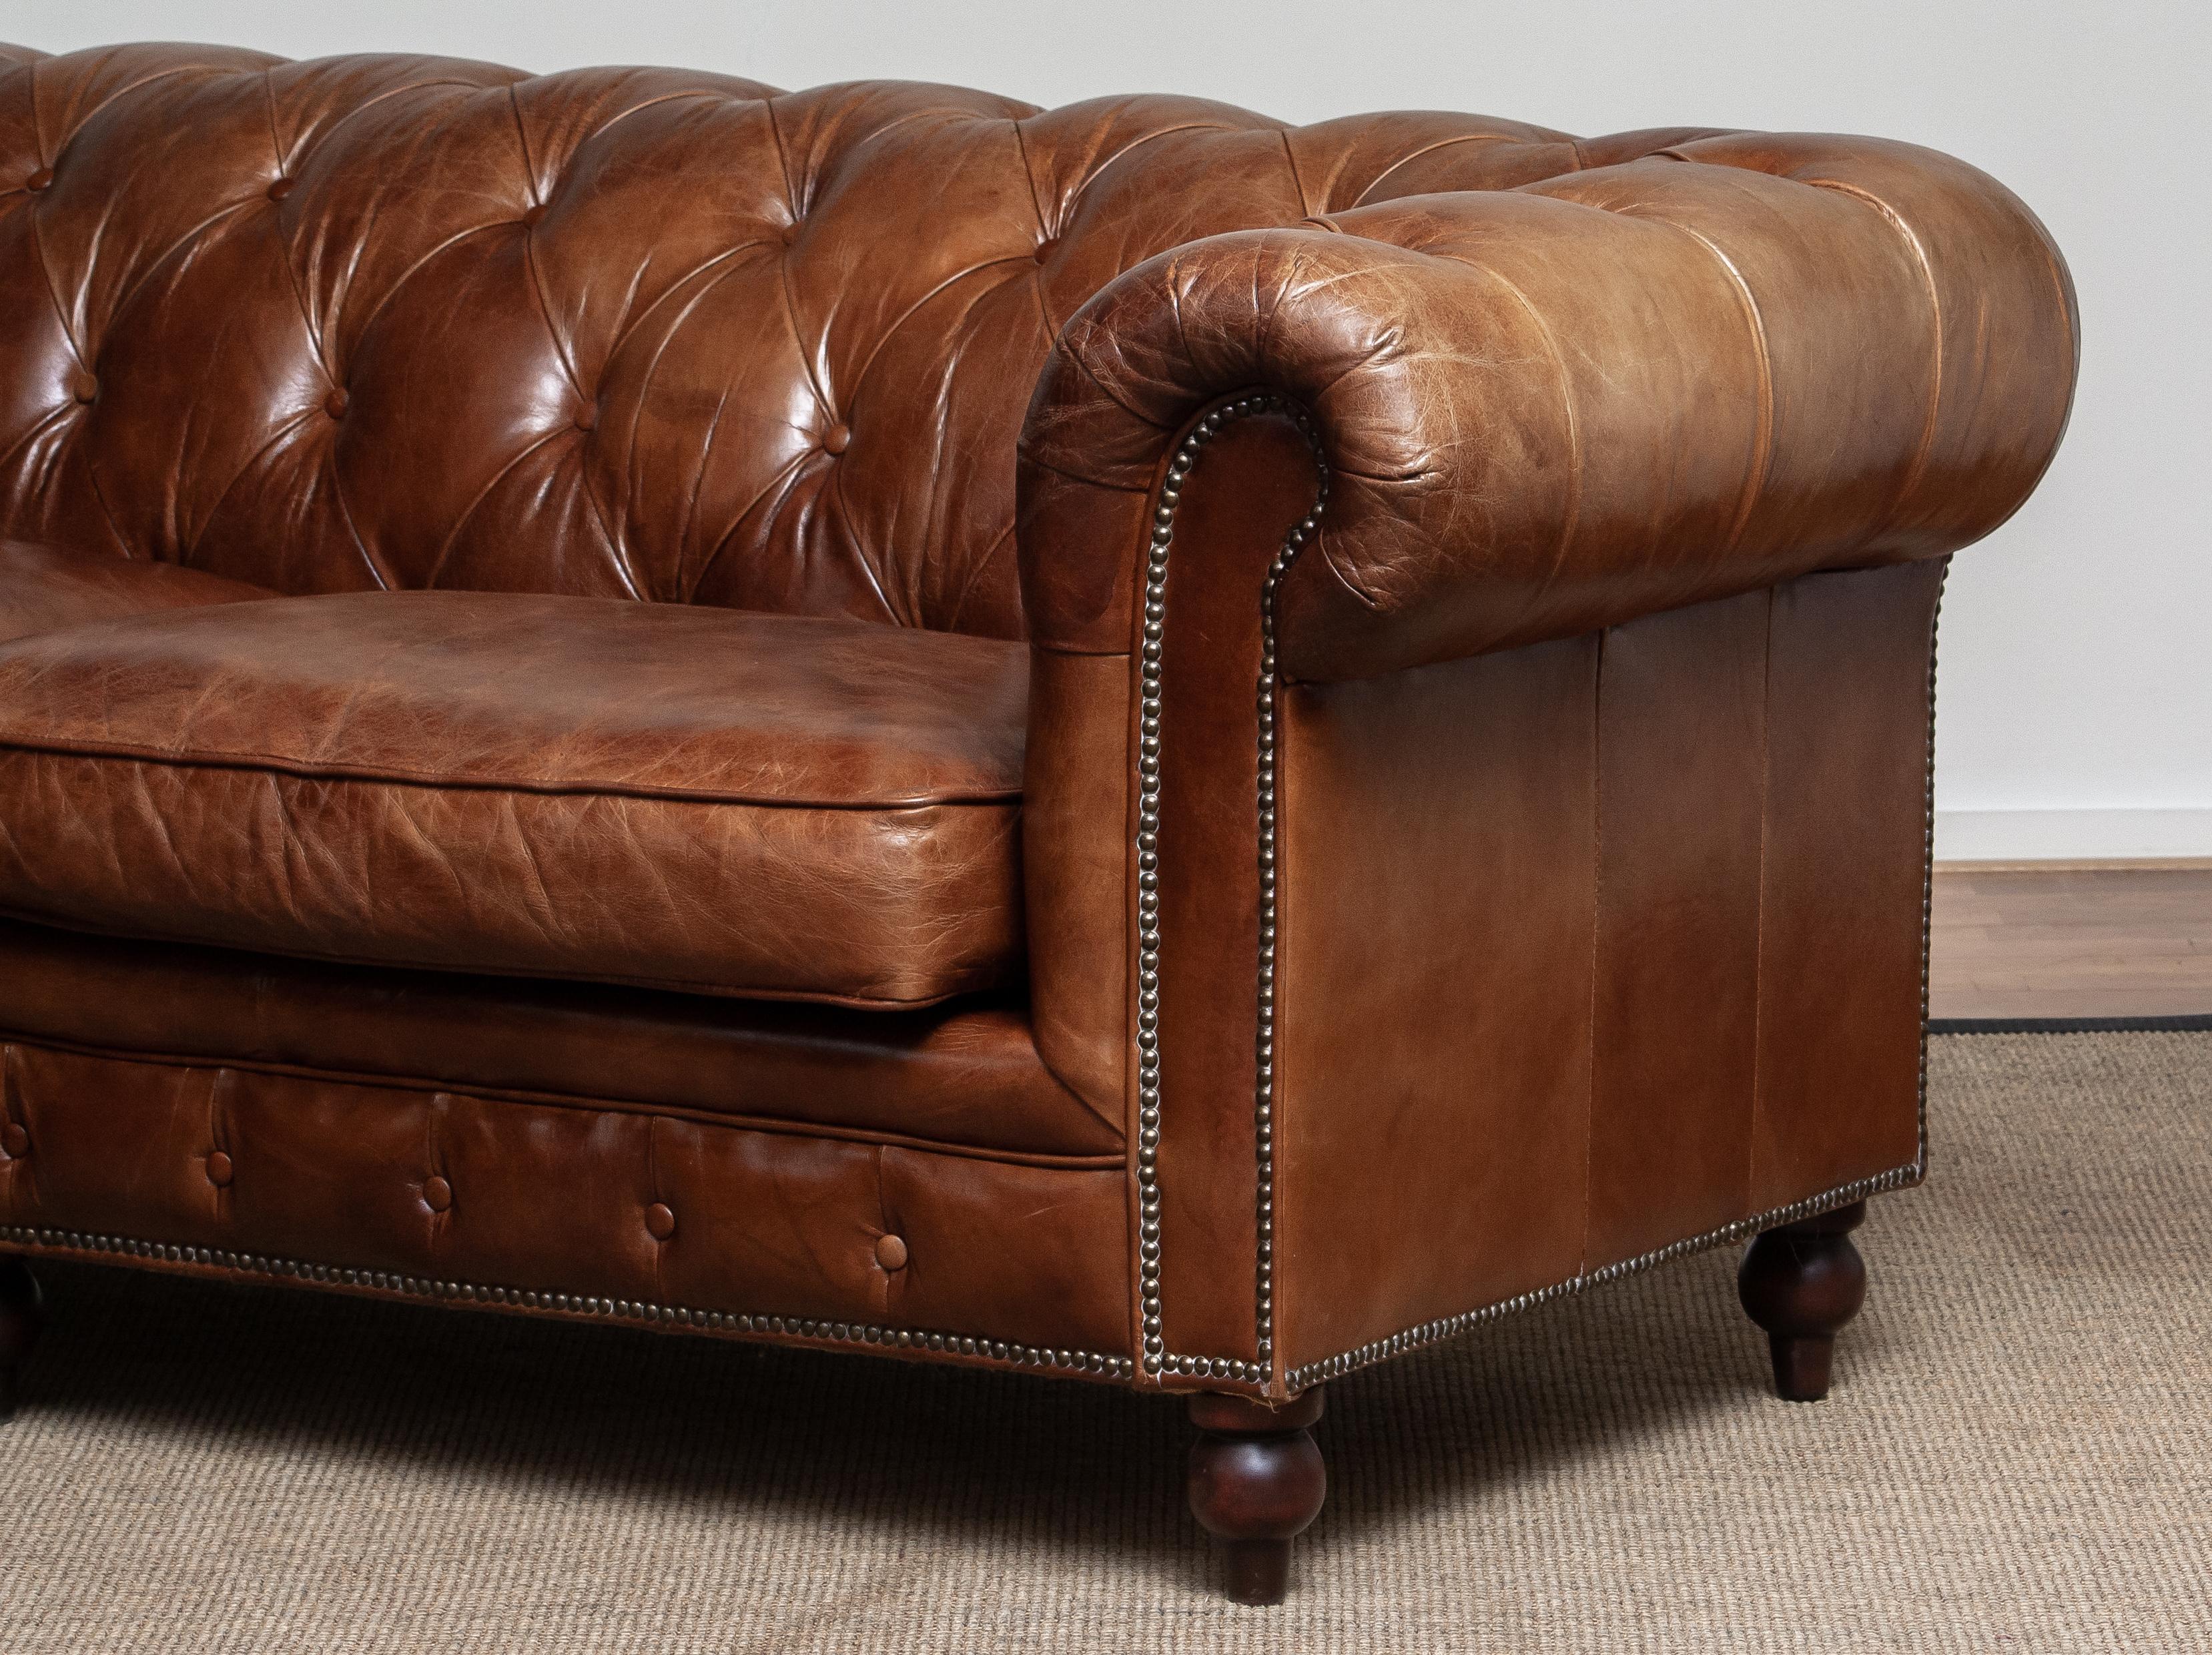 Tufted Brown Leather Chesterfield Sofa and Arm / Lounge Chair 14